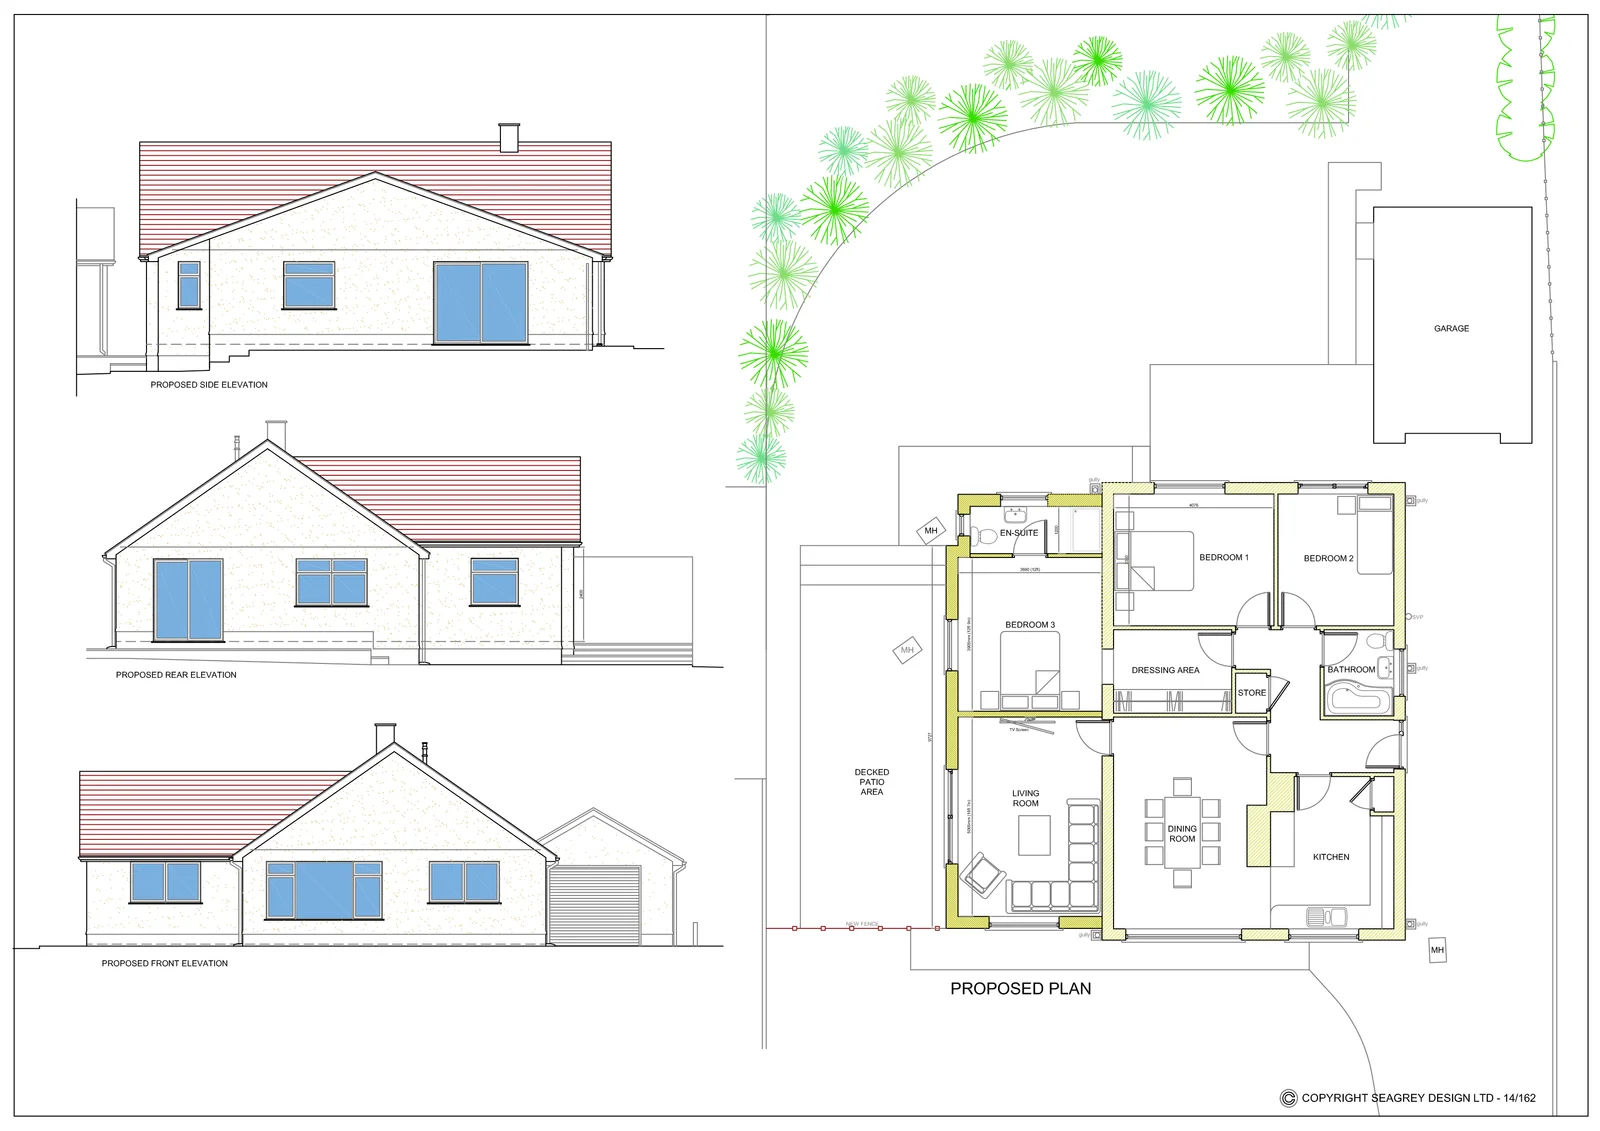 Easy Guide to gaining planning permission - Side extension plans - bungalow sketty